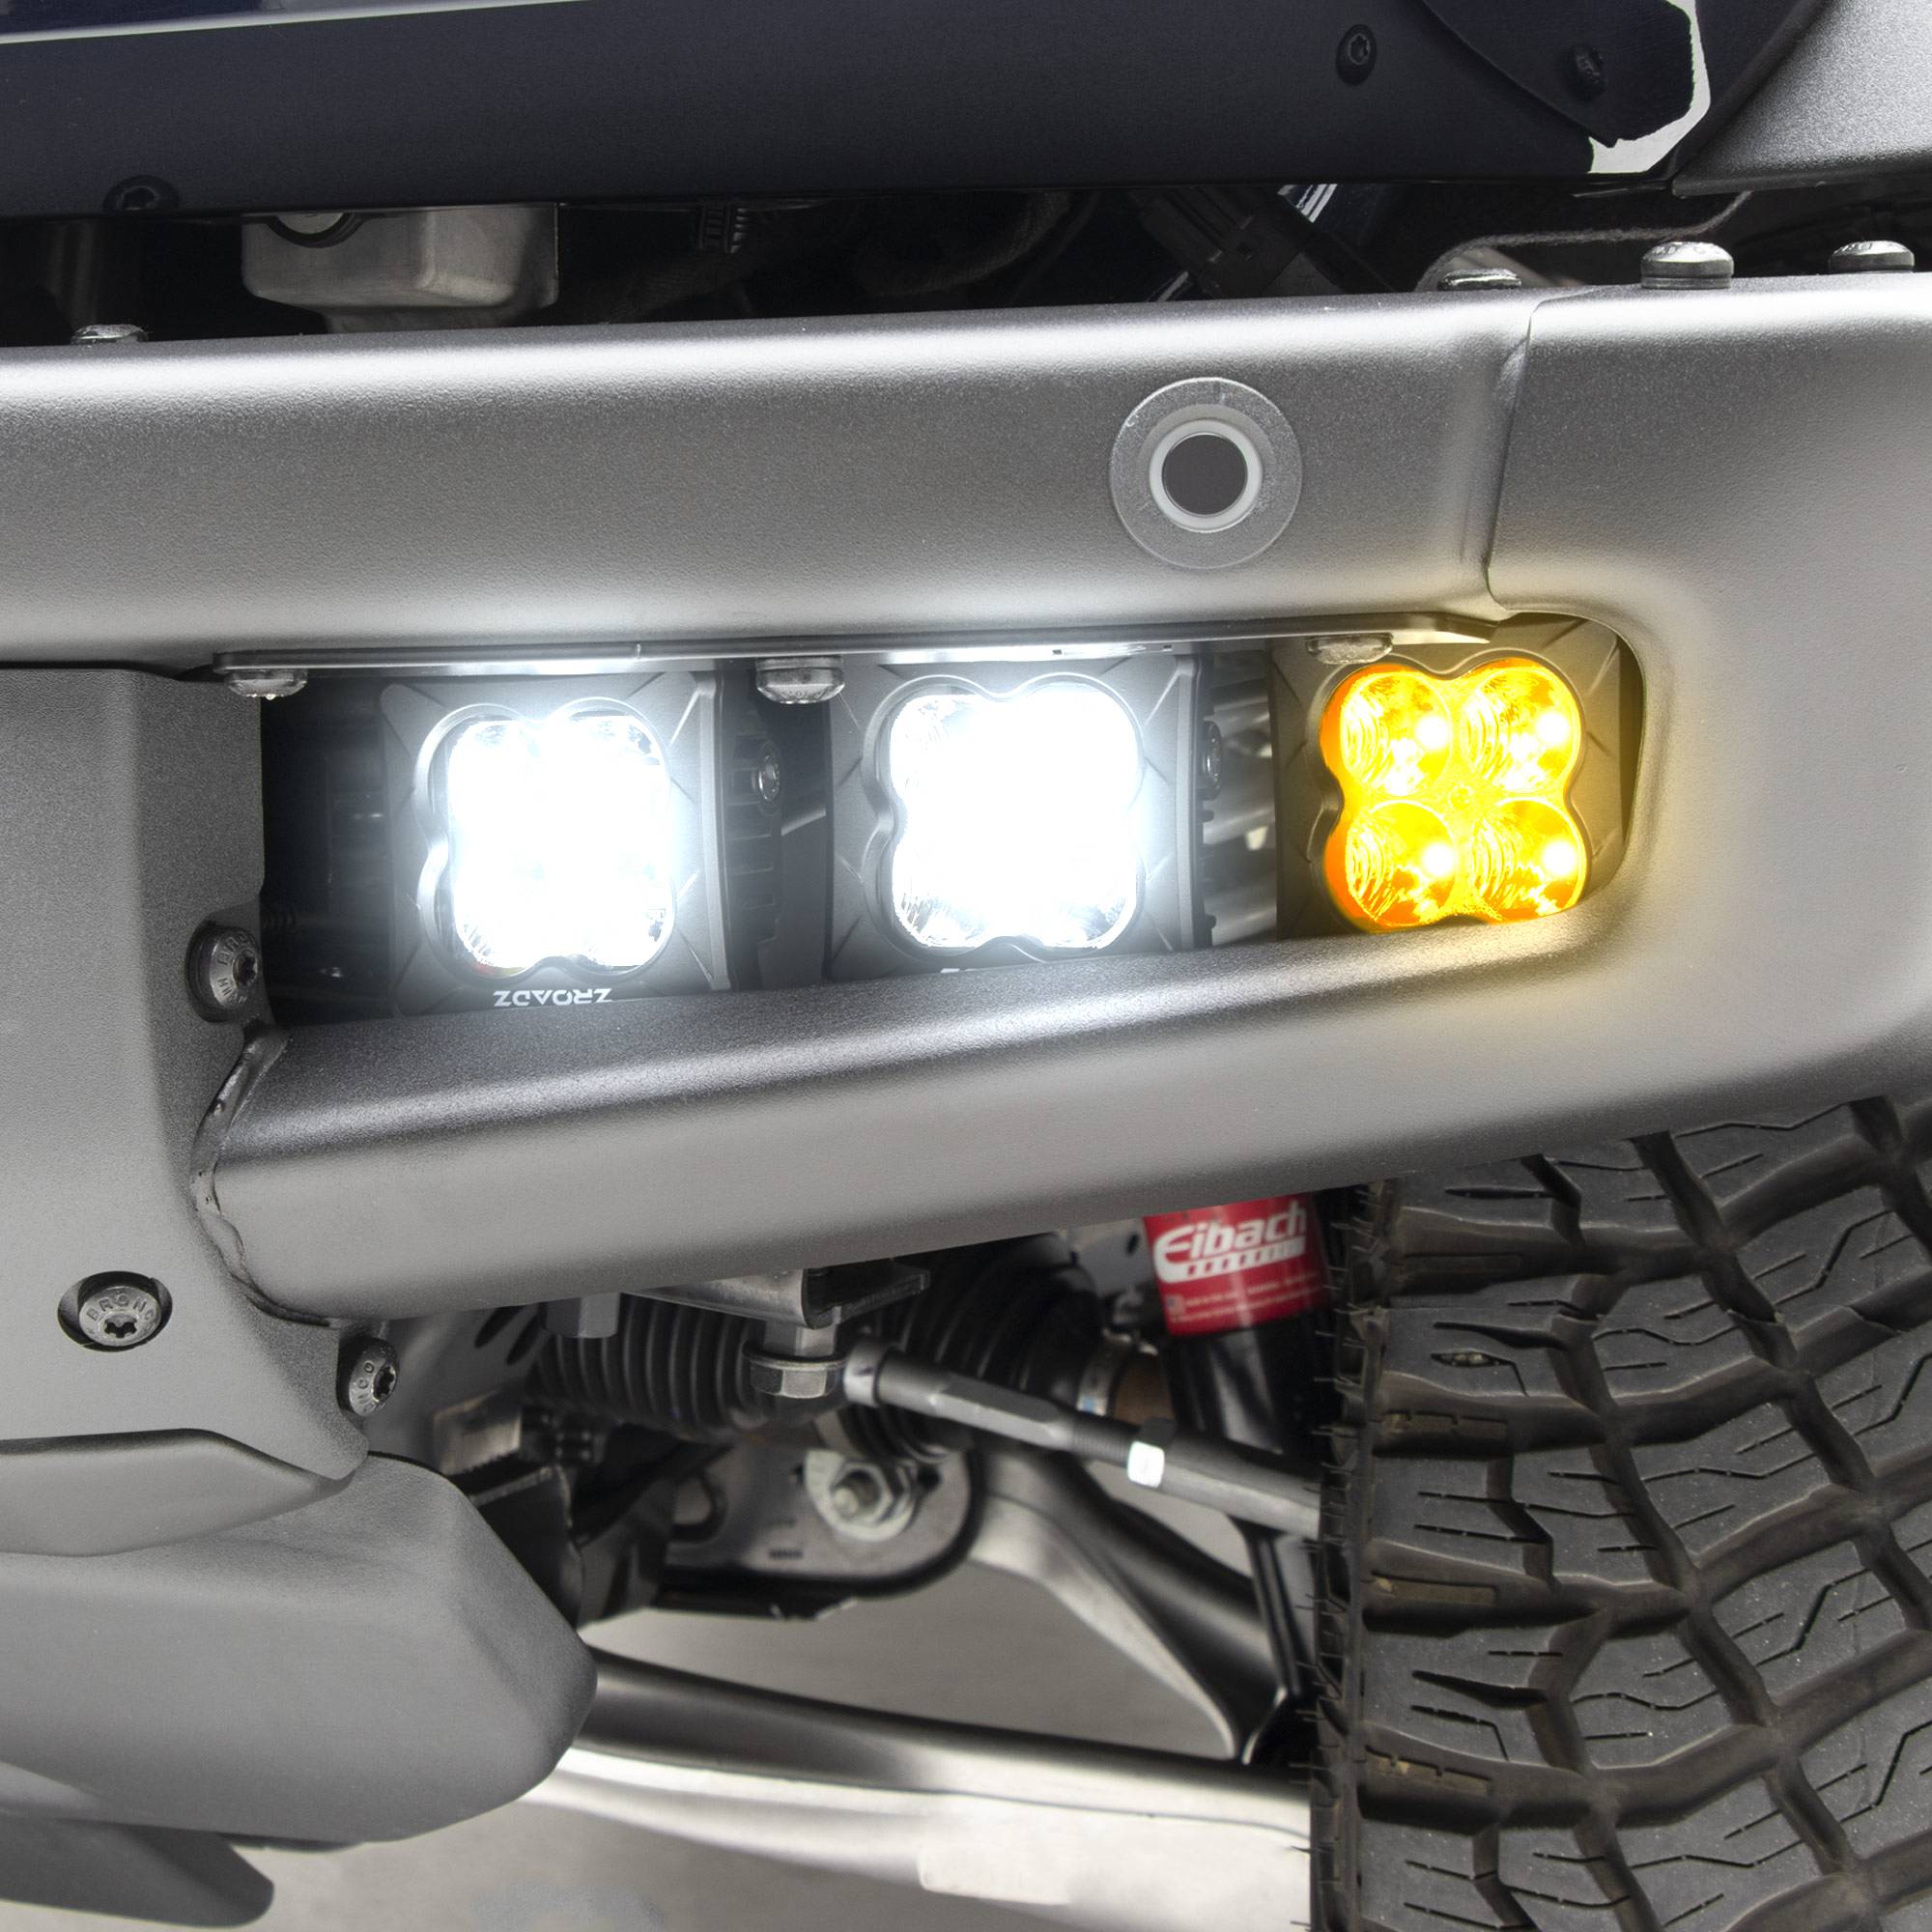 ZROADZ OFF ROAD PRODUCTS - 2021-2023 Ford Bronco Front Bumper Fog LED KIT, Includes (2) 3 inch ZROADZ Amber LED Pod Lights and (4) 3 inch White LED Pod Lights - Part # Z325401-KITAW